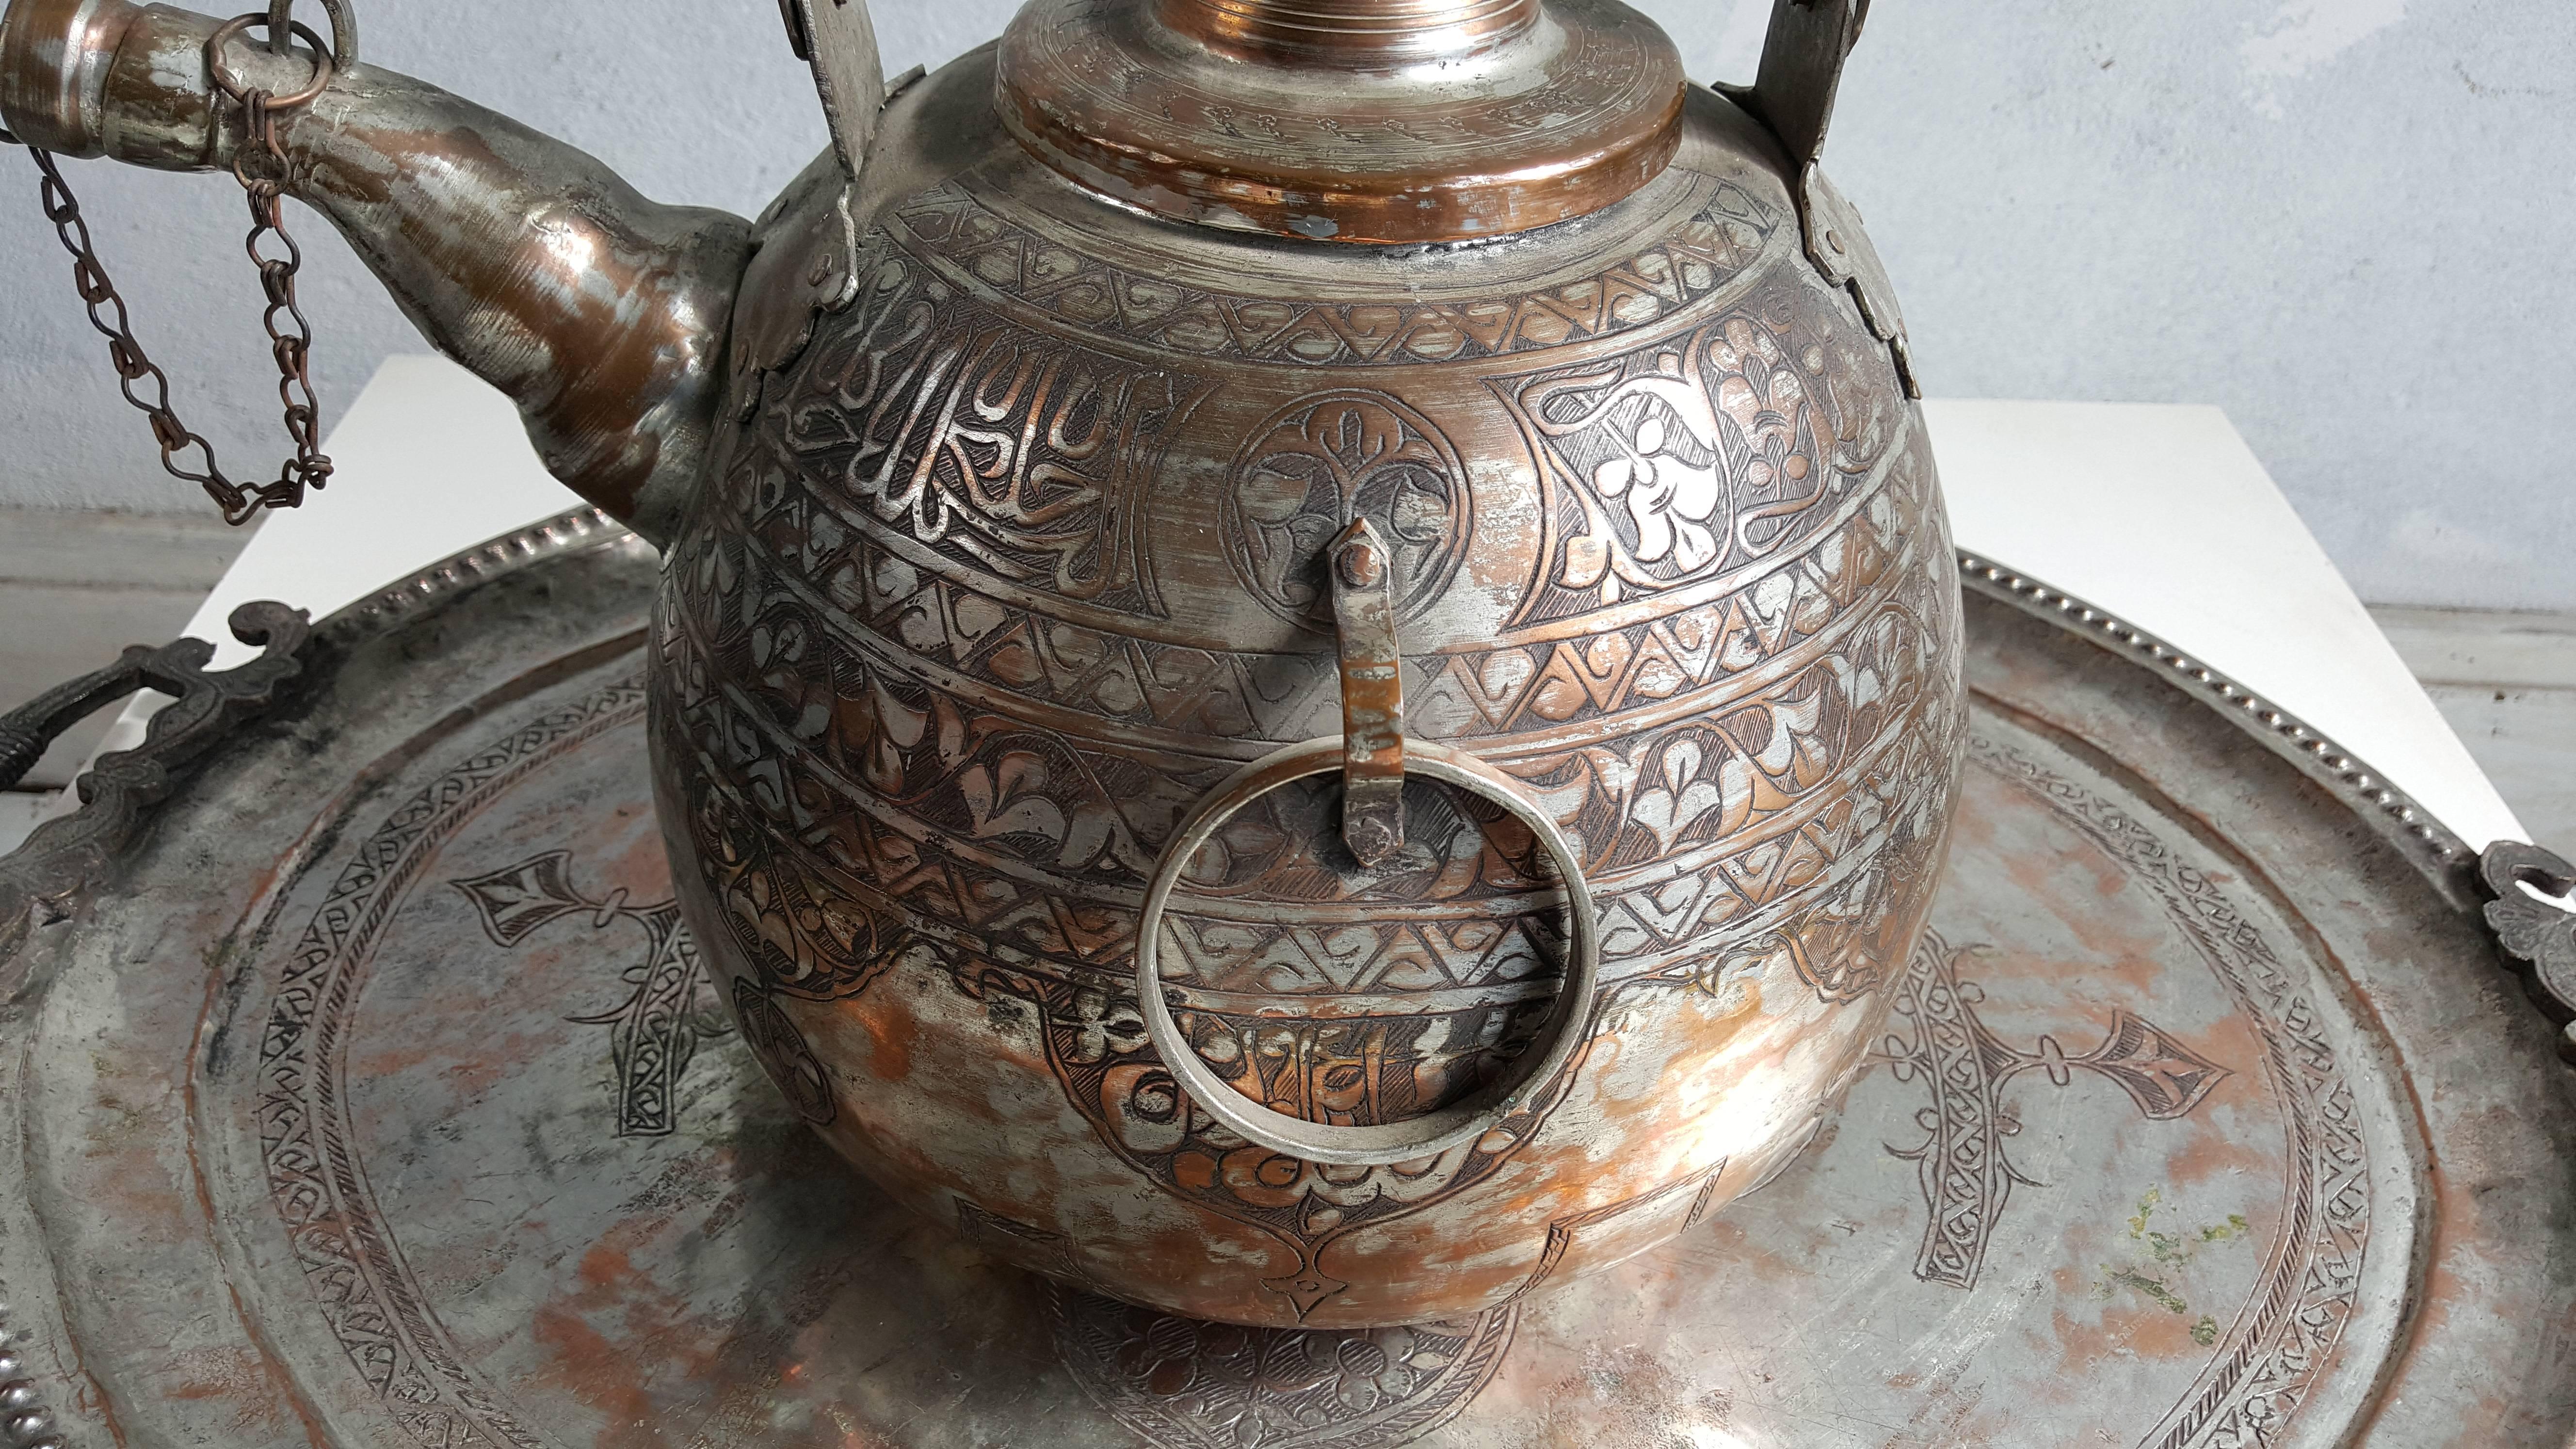 Monumental Antique Mid-Eastern Hammered and Engraved Kettle and Tray 1